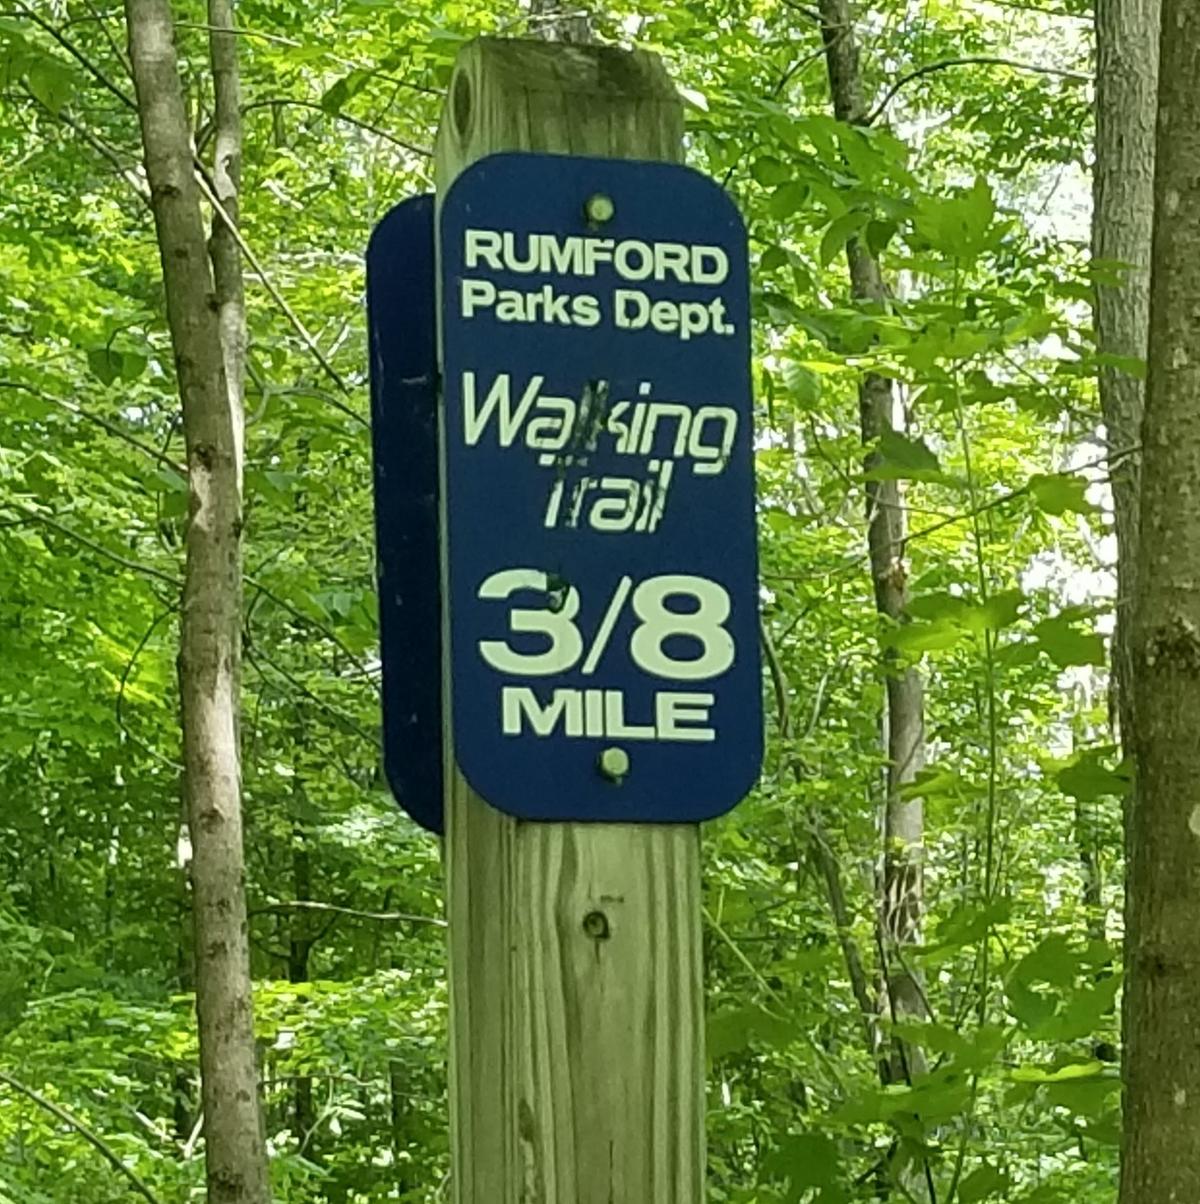 A distance marker along the trail.